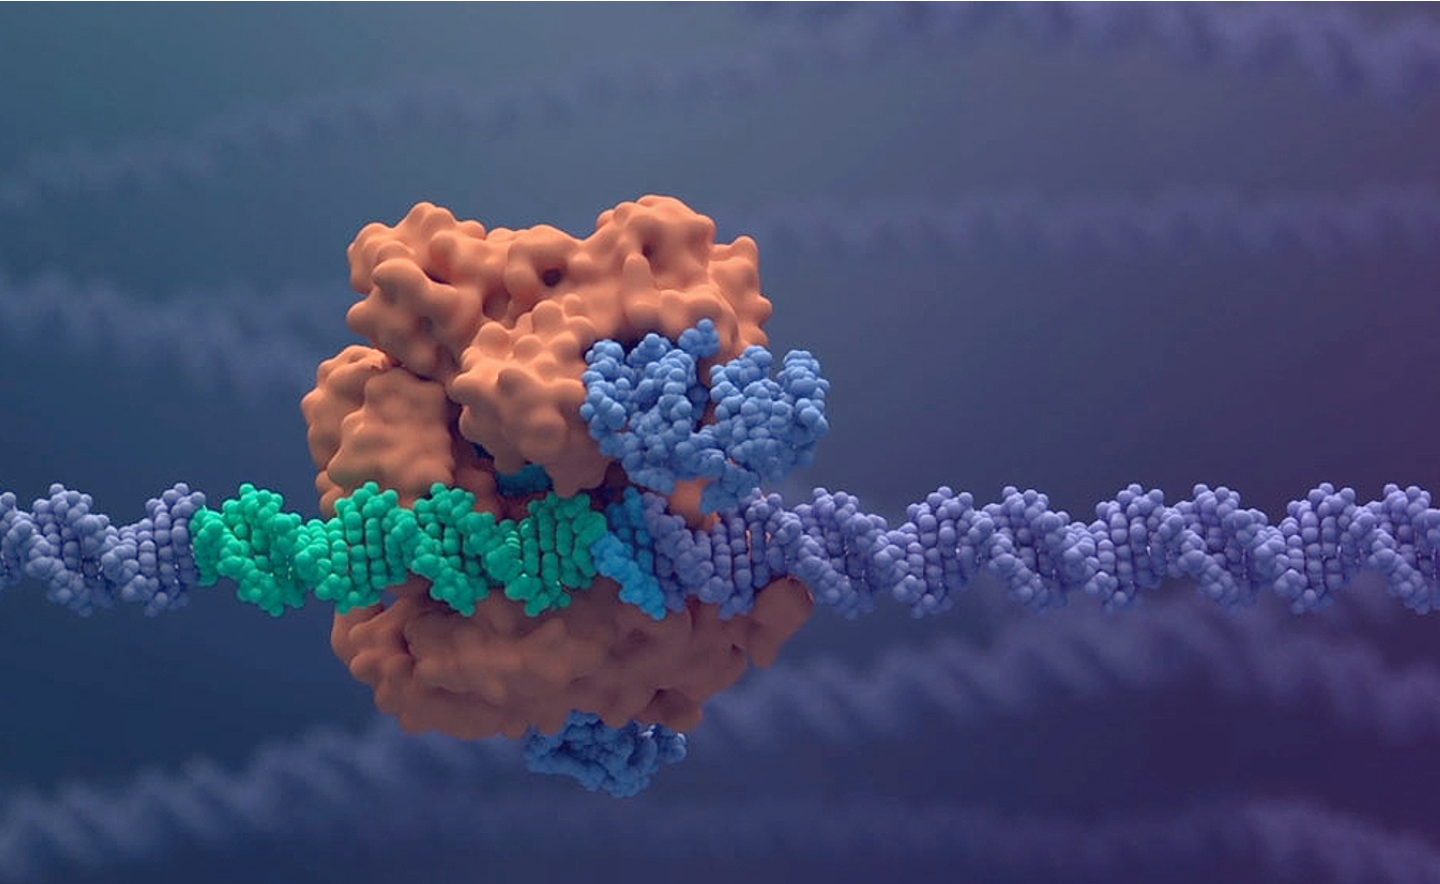 CRISPR is a family of DNA sequences that, when coupled with the enzyme Cas9, acts as scissors to cut strands of DNA. The cell can recognize damaged DNA and works to repair it. This process enables scientists to edit parts of the genome. Shown here is CRISPR-Cas9 interacting with DNA.

Photo courtesy of Vertex Pharmaceuticals